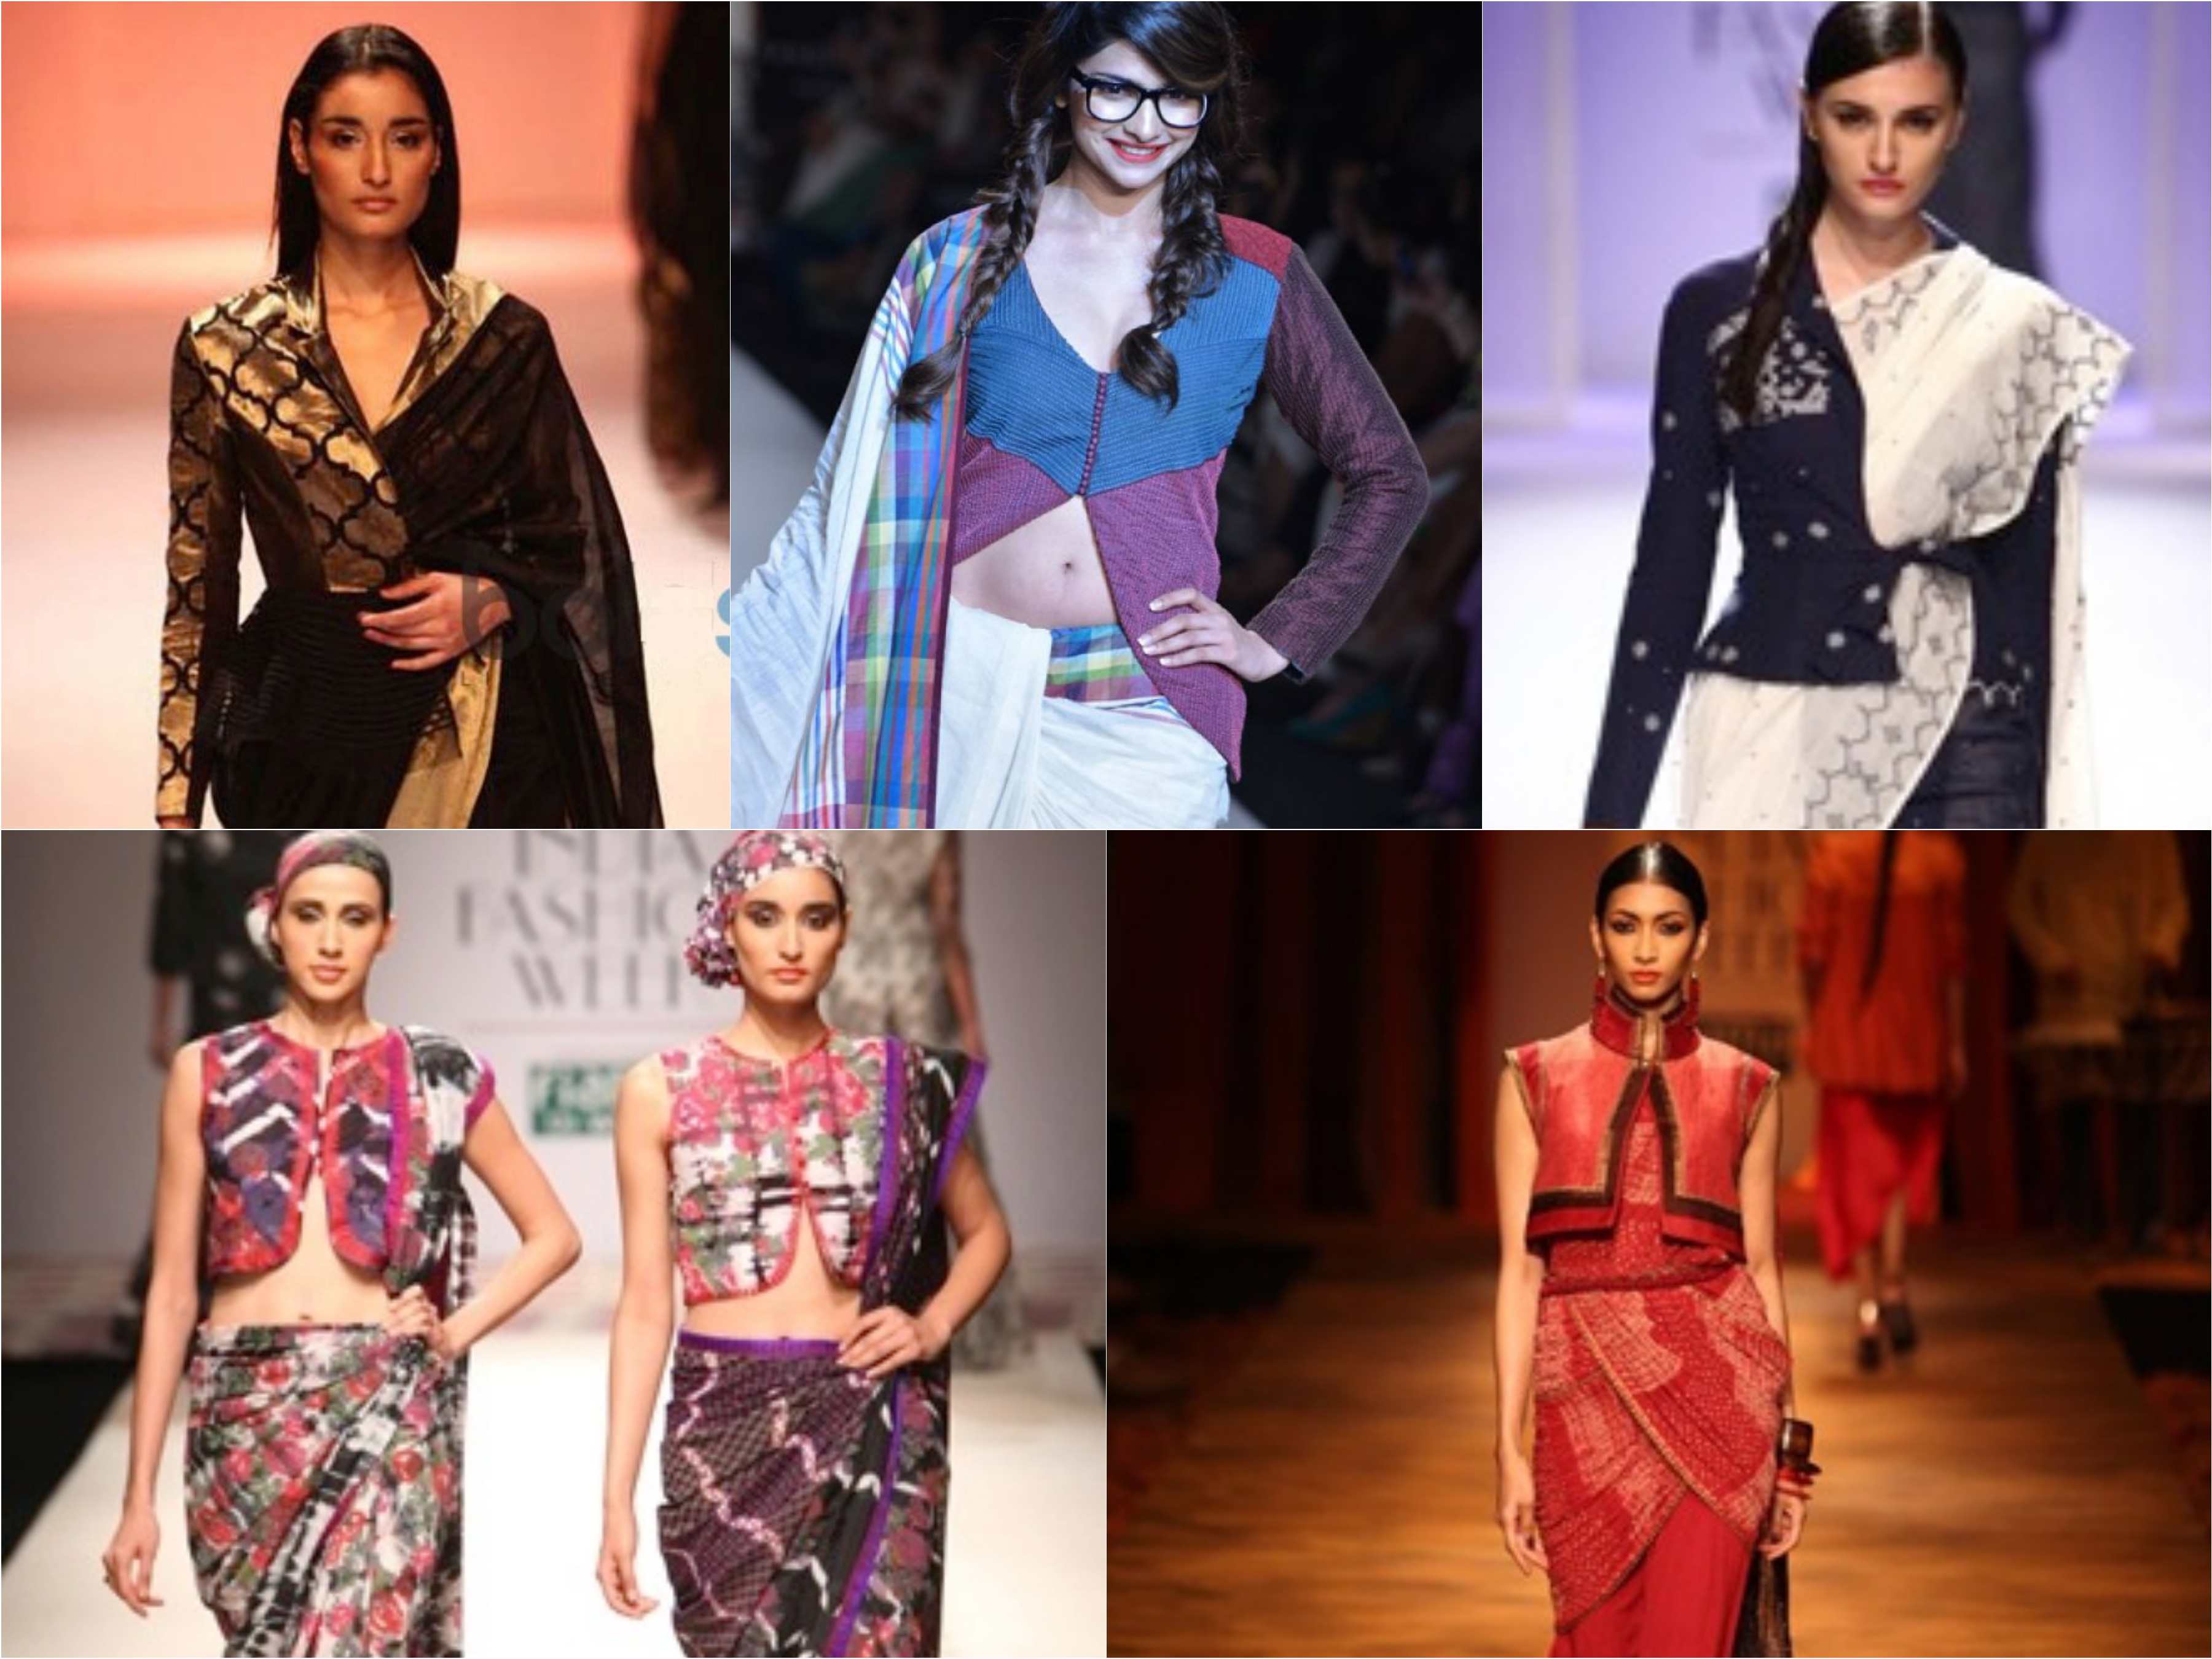 Saree- Interesting latest trends to wear a Saree & Reinvent your look